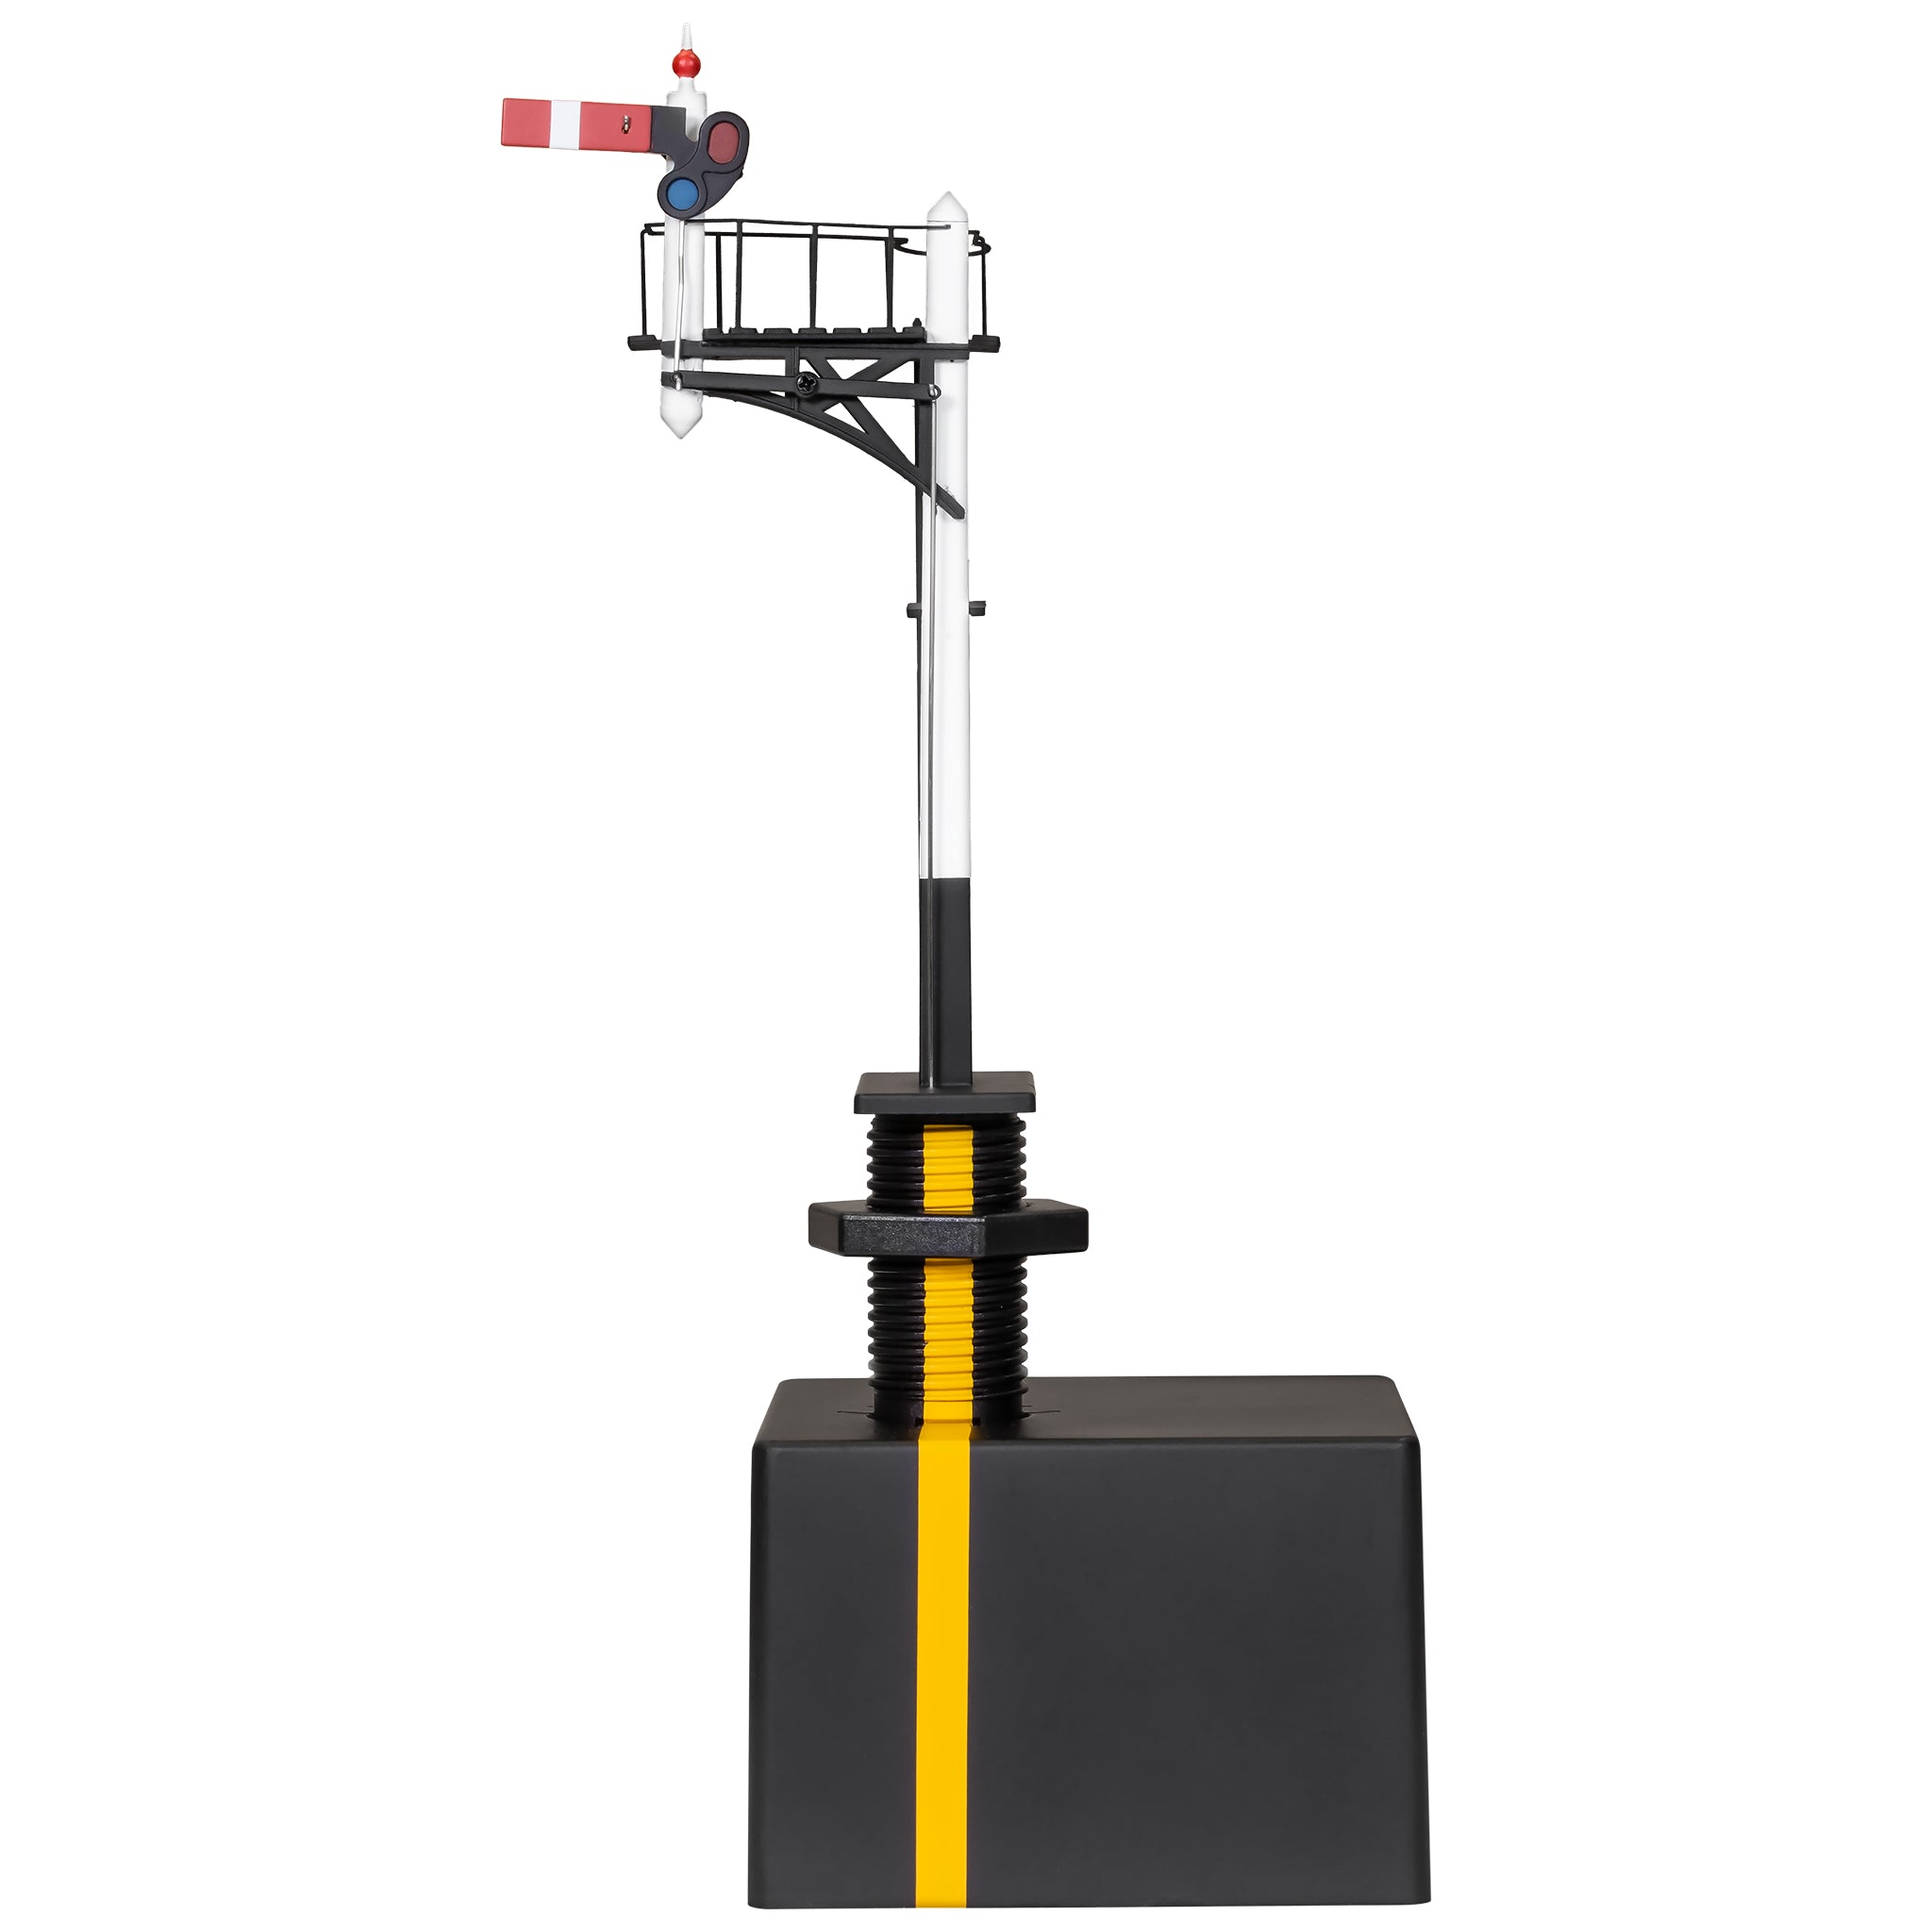 N Digital semaphore home signal, with 2 uncoupled arms, Semaphore signals, Gauge N, Product range